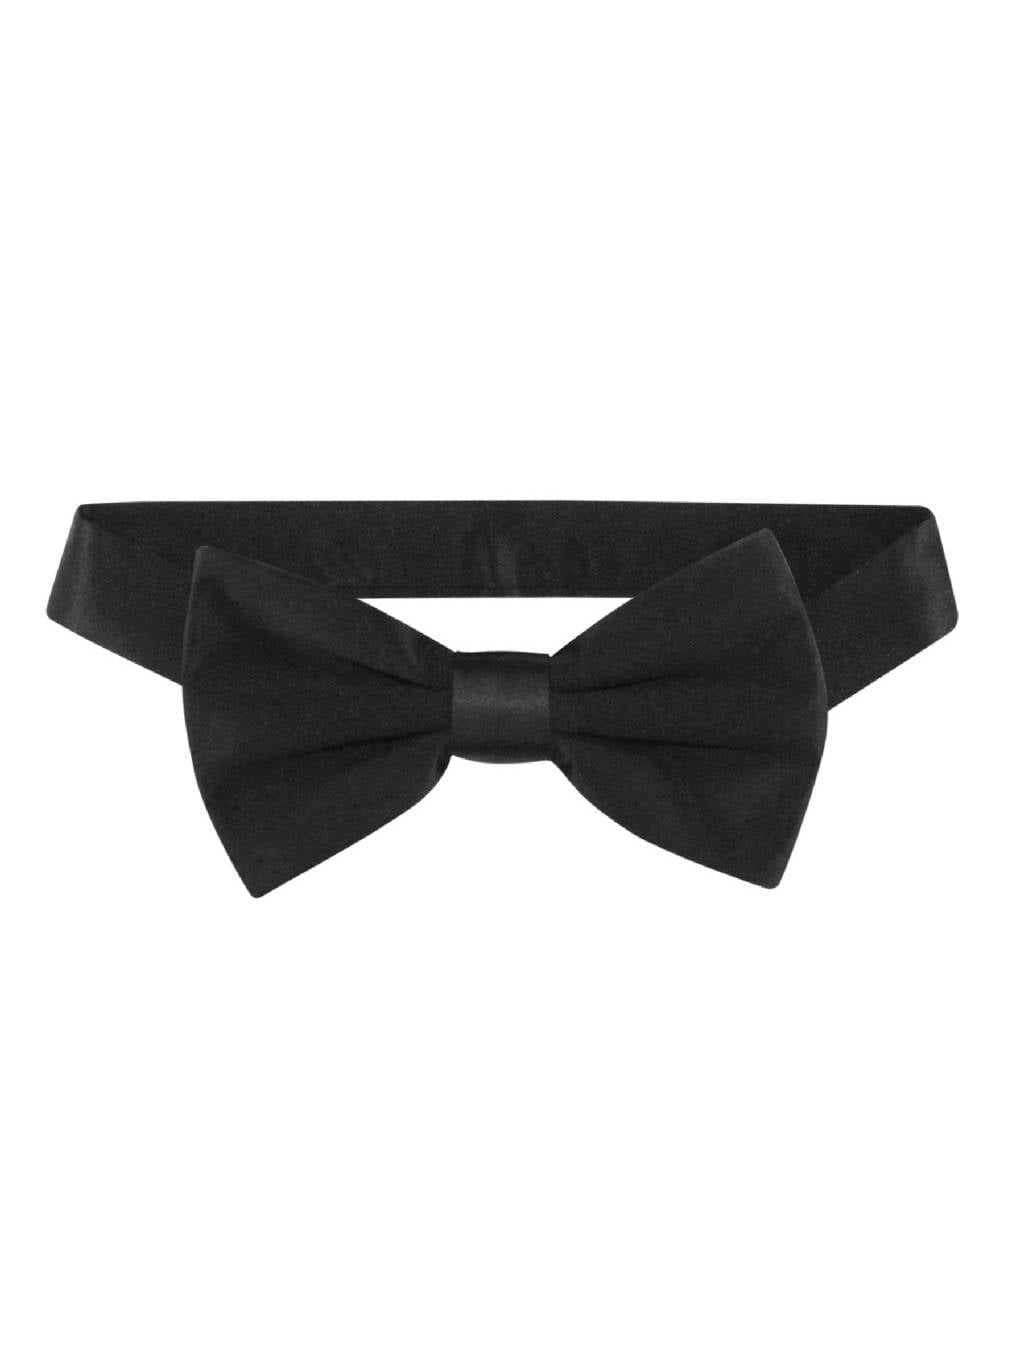 Solid Silk Tie Your Self Tuxedo  Bow Tie in Five Basic Colors 